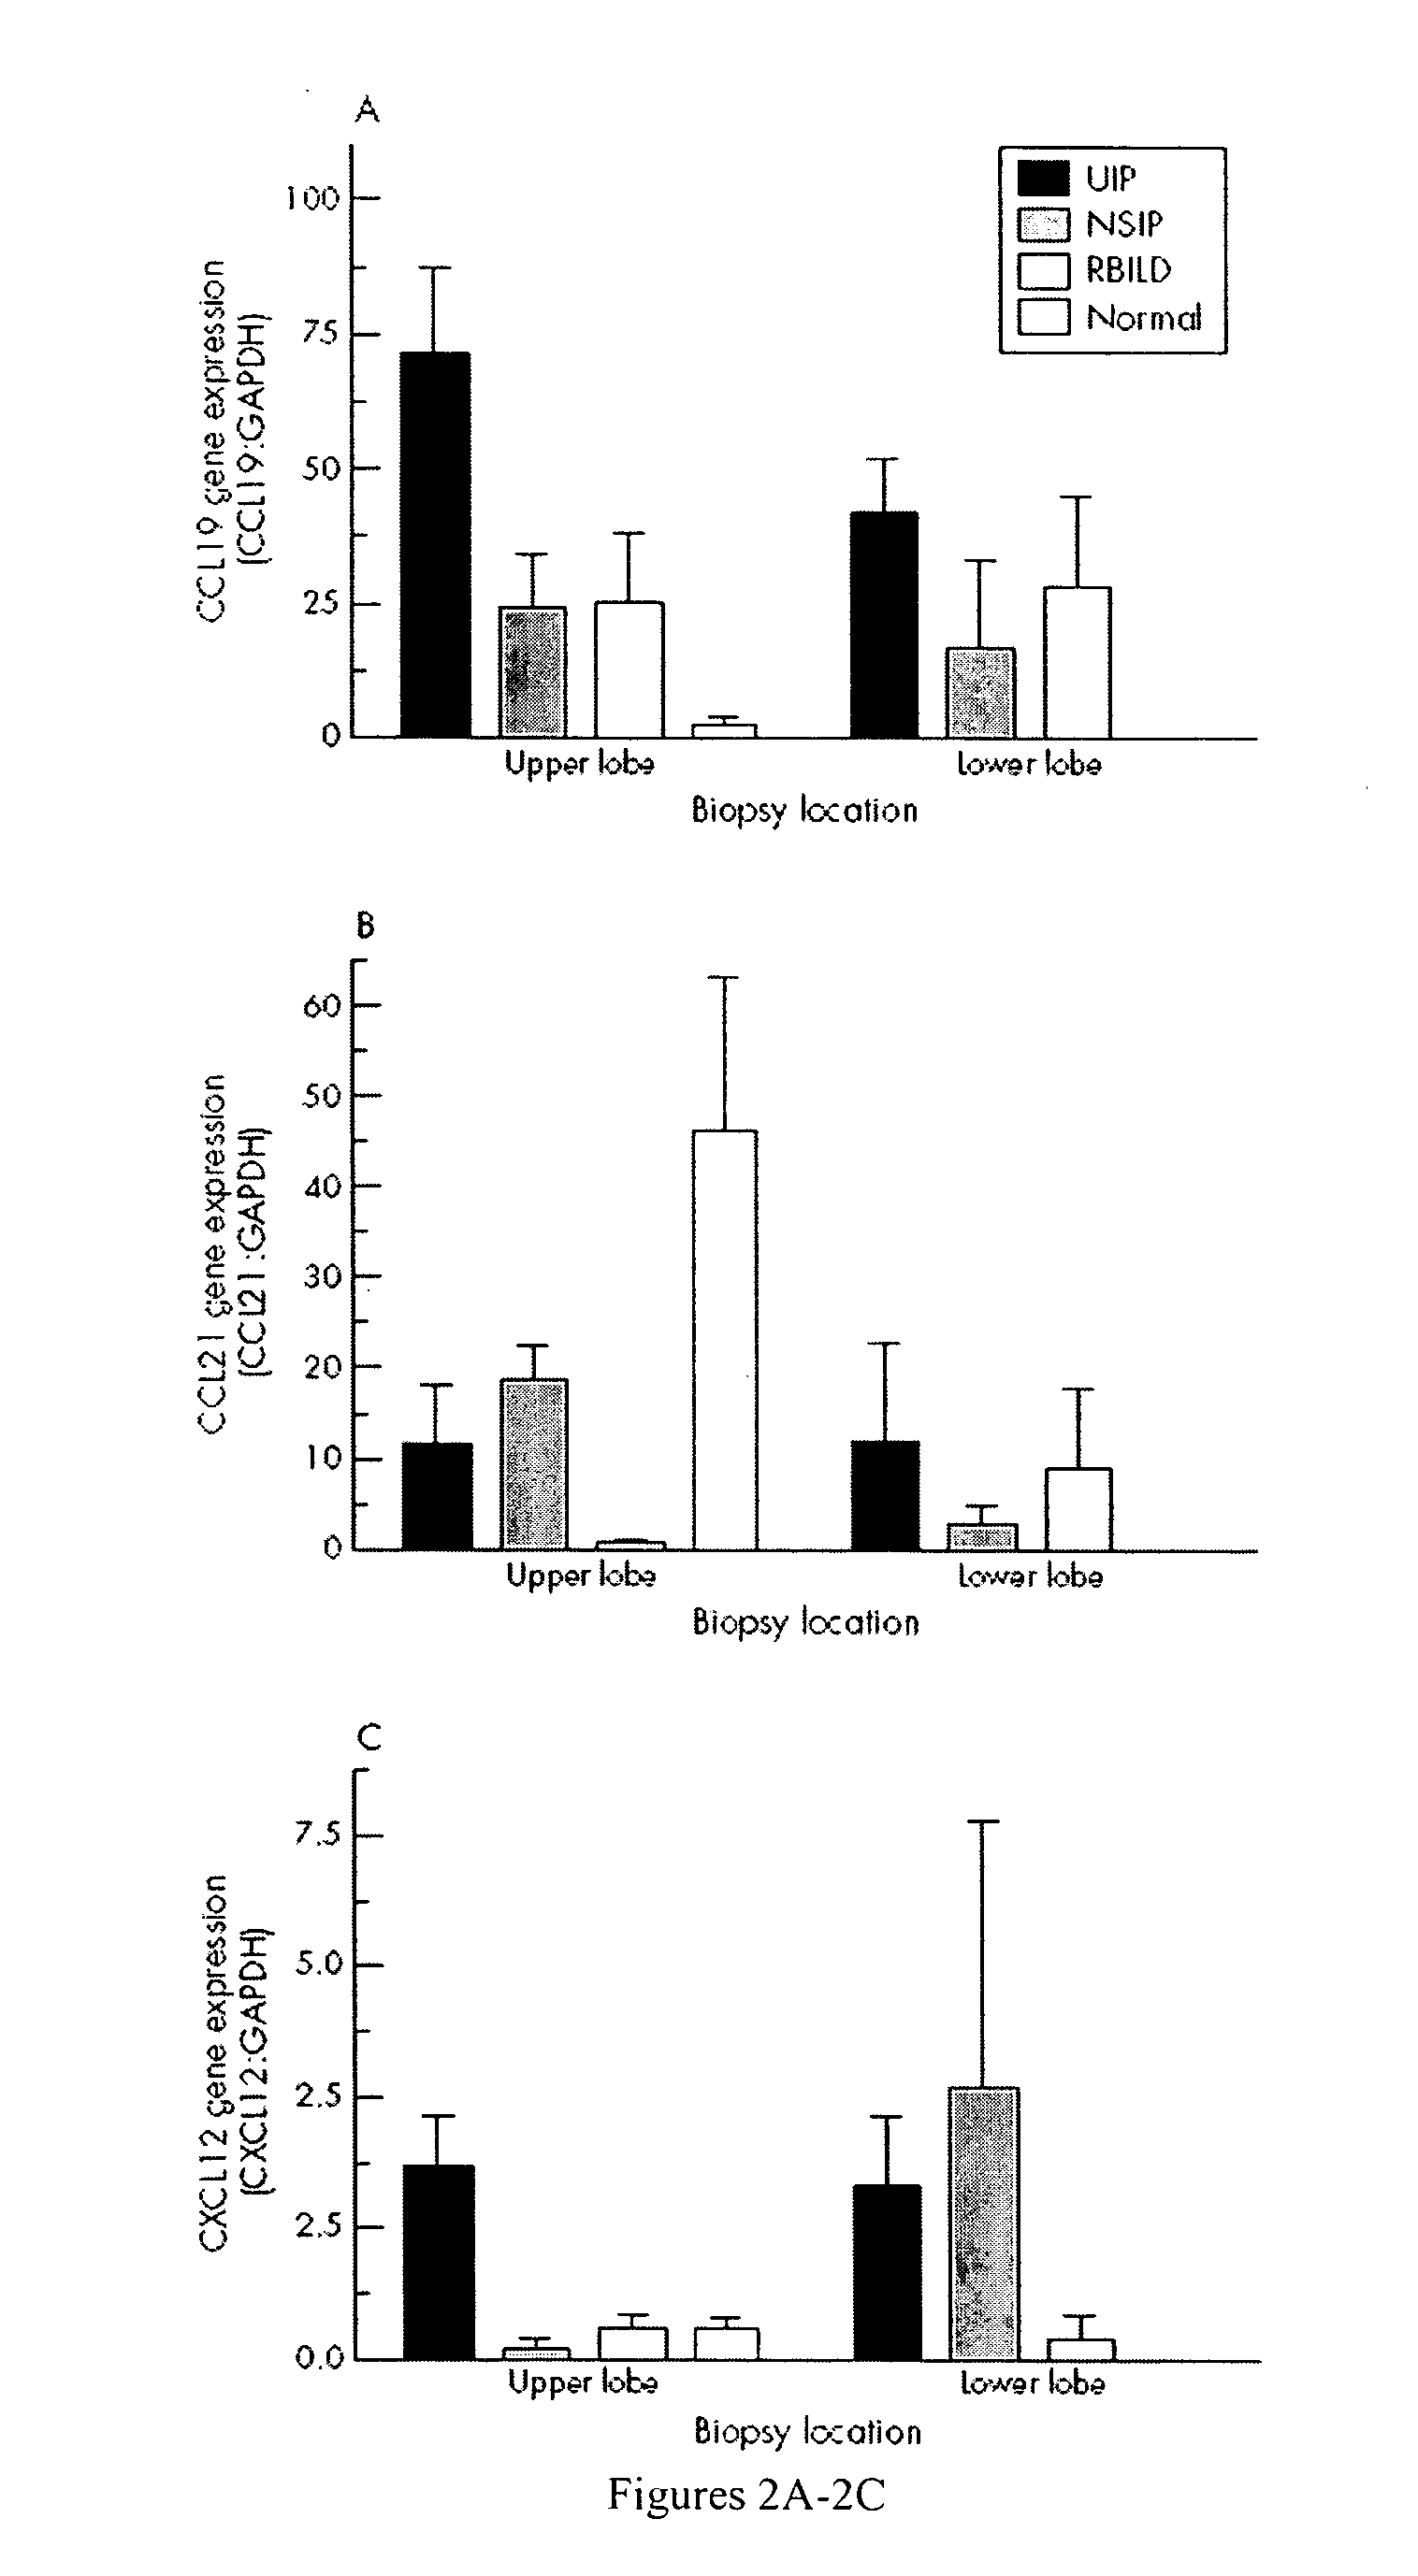 Materials and methods for treating chronic fibrotic diseases